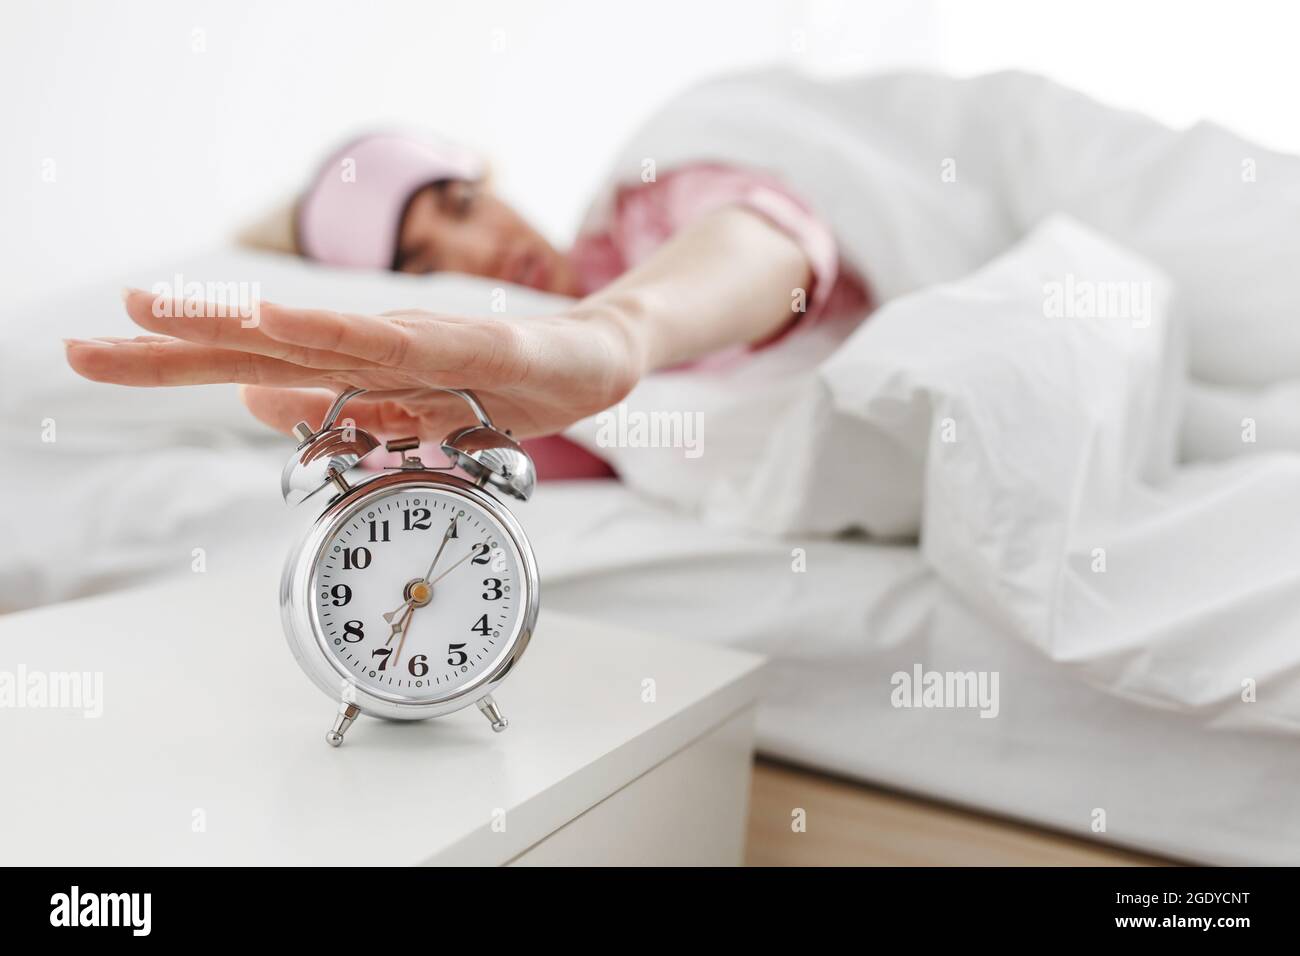 Alarm clock ringing, woman waking up in early morning for work, sleeping disorder Stock Photo